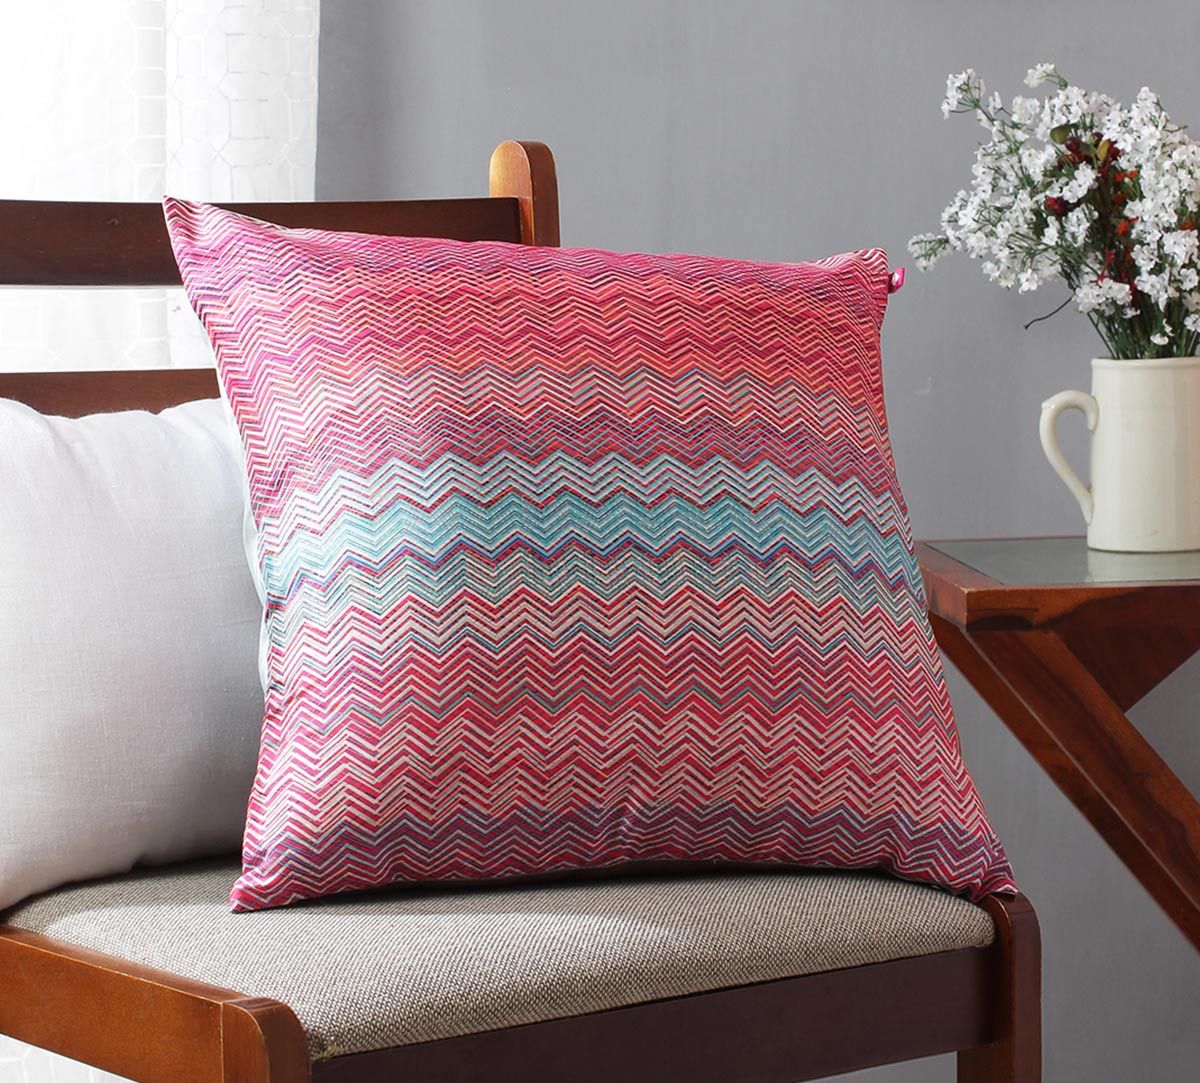 India Circus Waves of Chevron Blended Taf Silk Cushion Cover